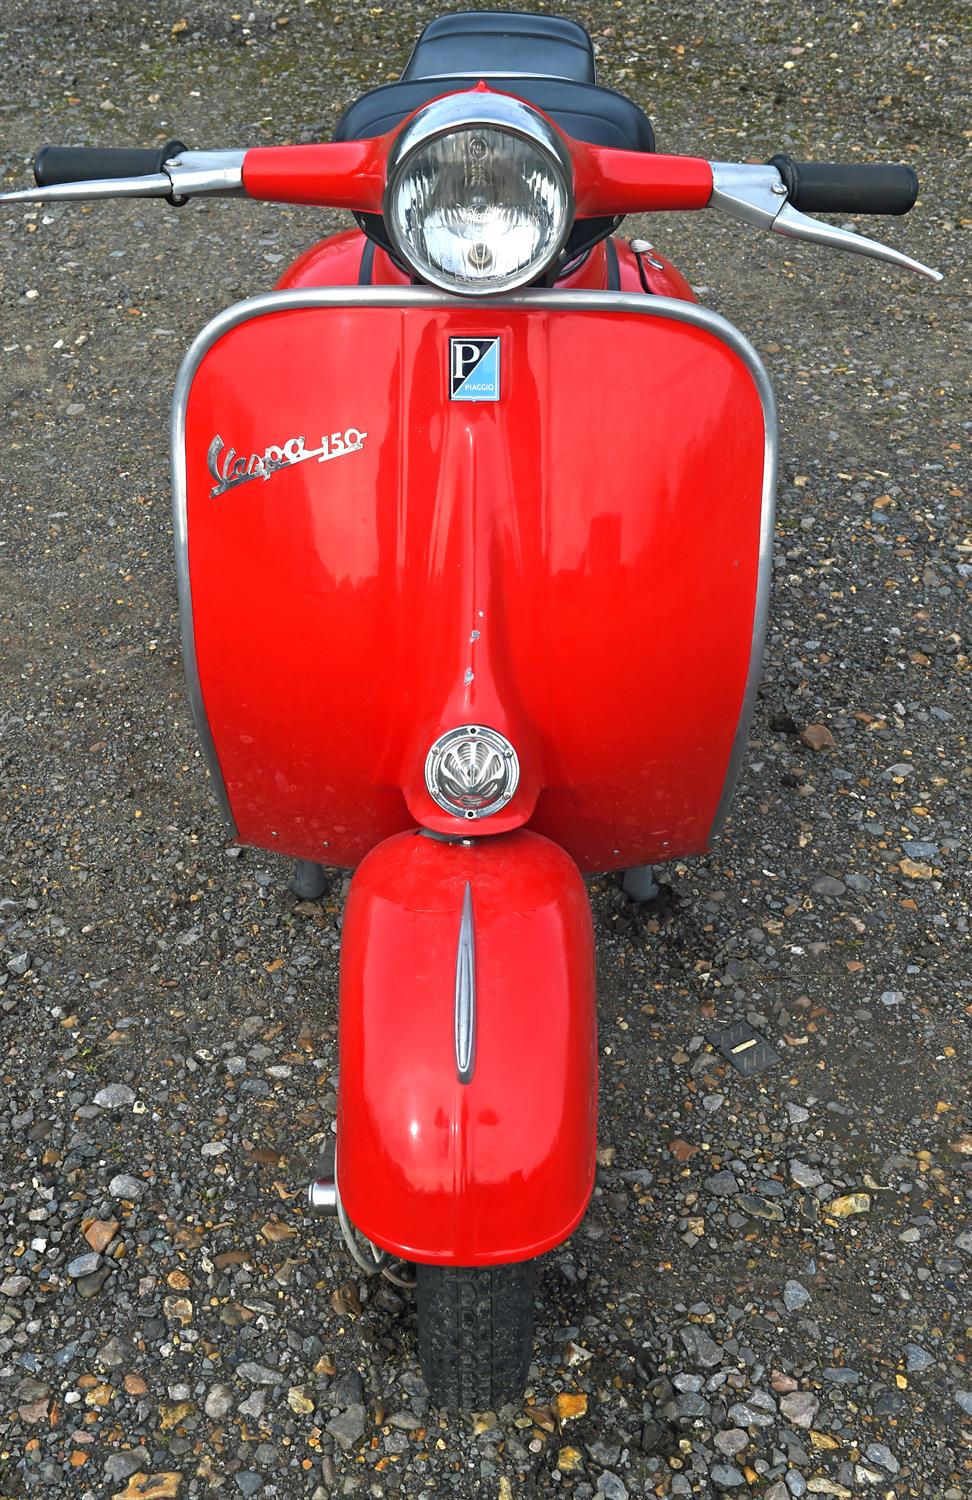 1961 Vespa VBB Standard 150cc 4 Speed. Registration number: 864 XVN. It was imported into the UK - Image 3 of 9